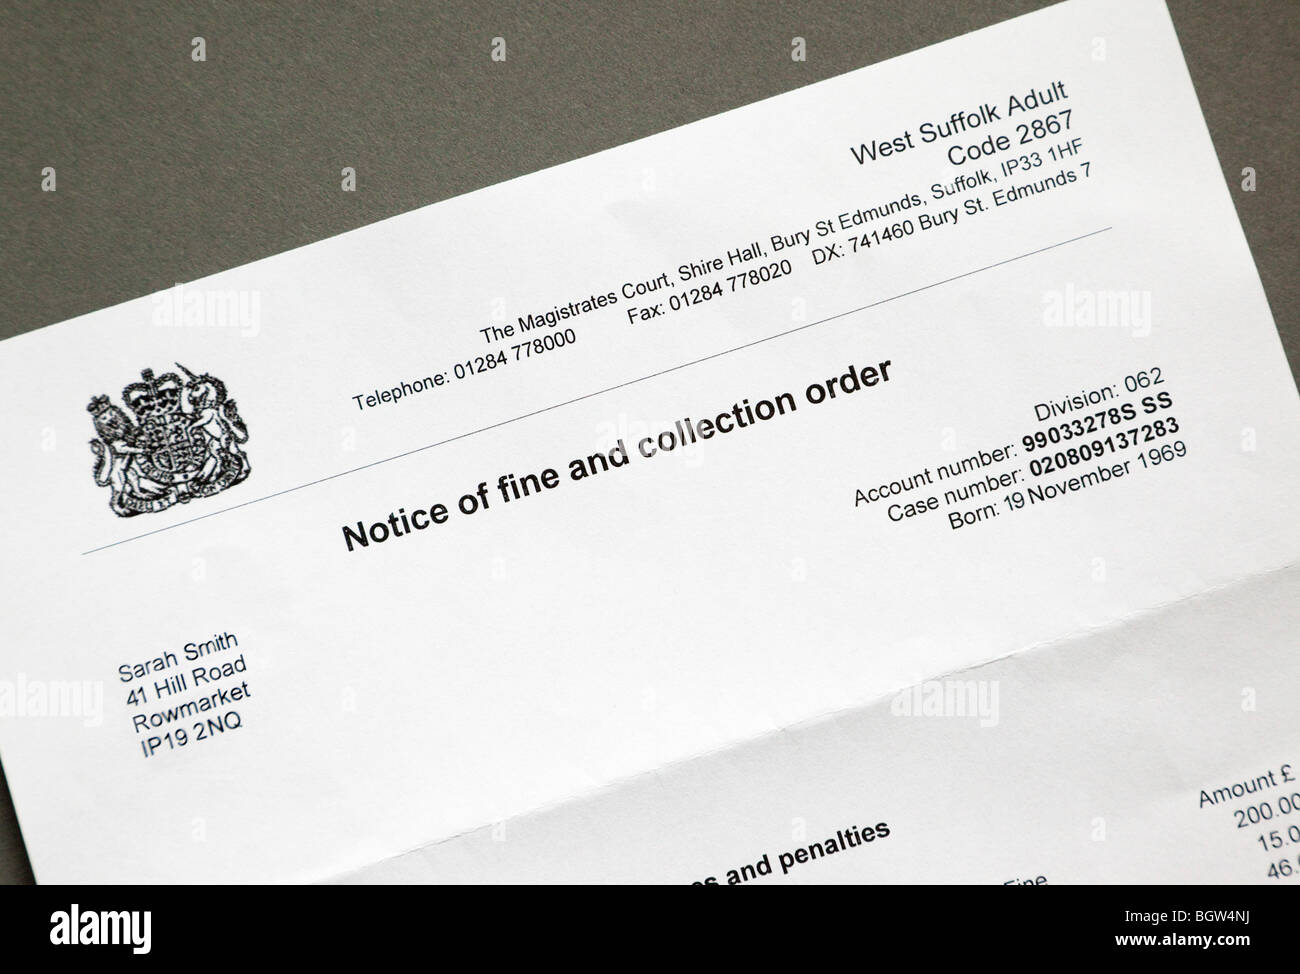 Notice of fine and collection order issued by a magistrates court Stock  Photo - Alamy